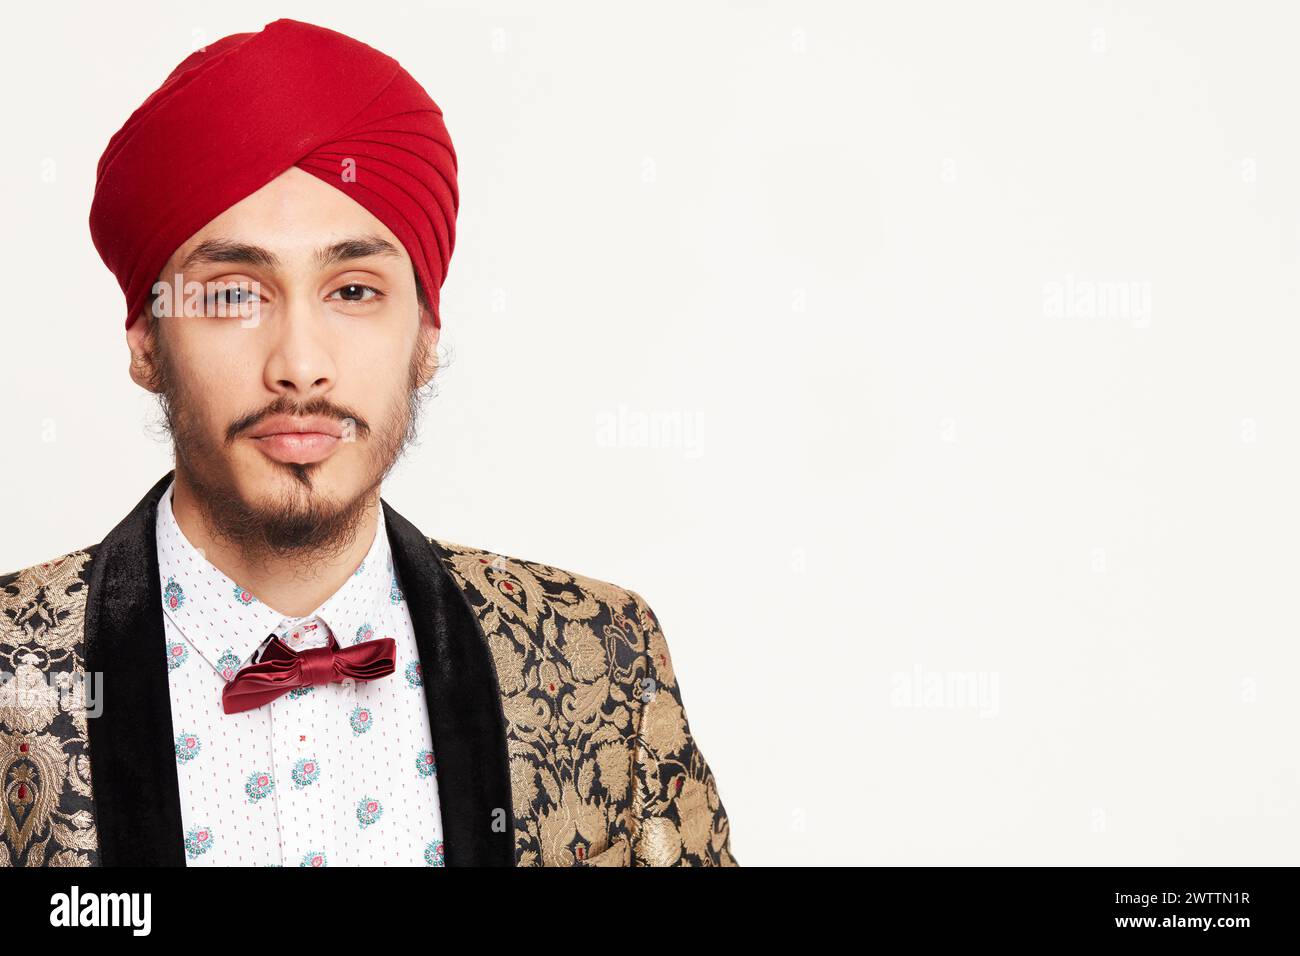 Man in traditional turban and patterned blazer Stock Photo